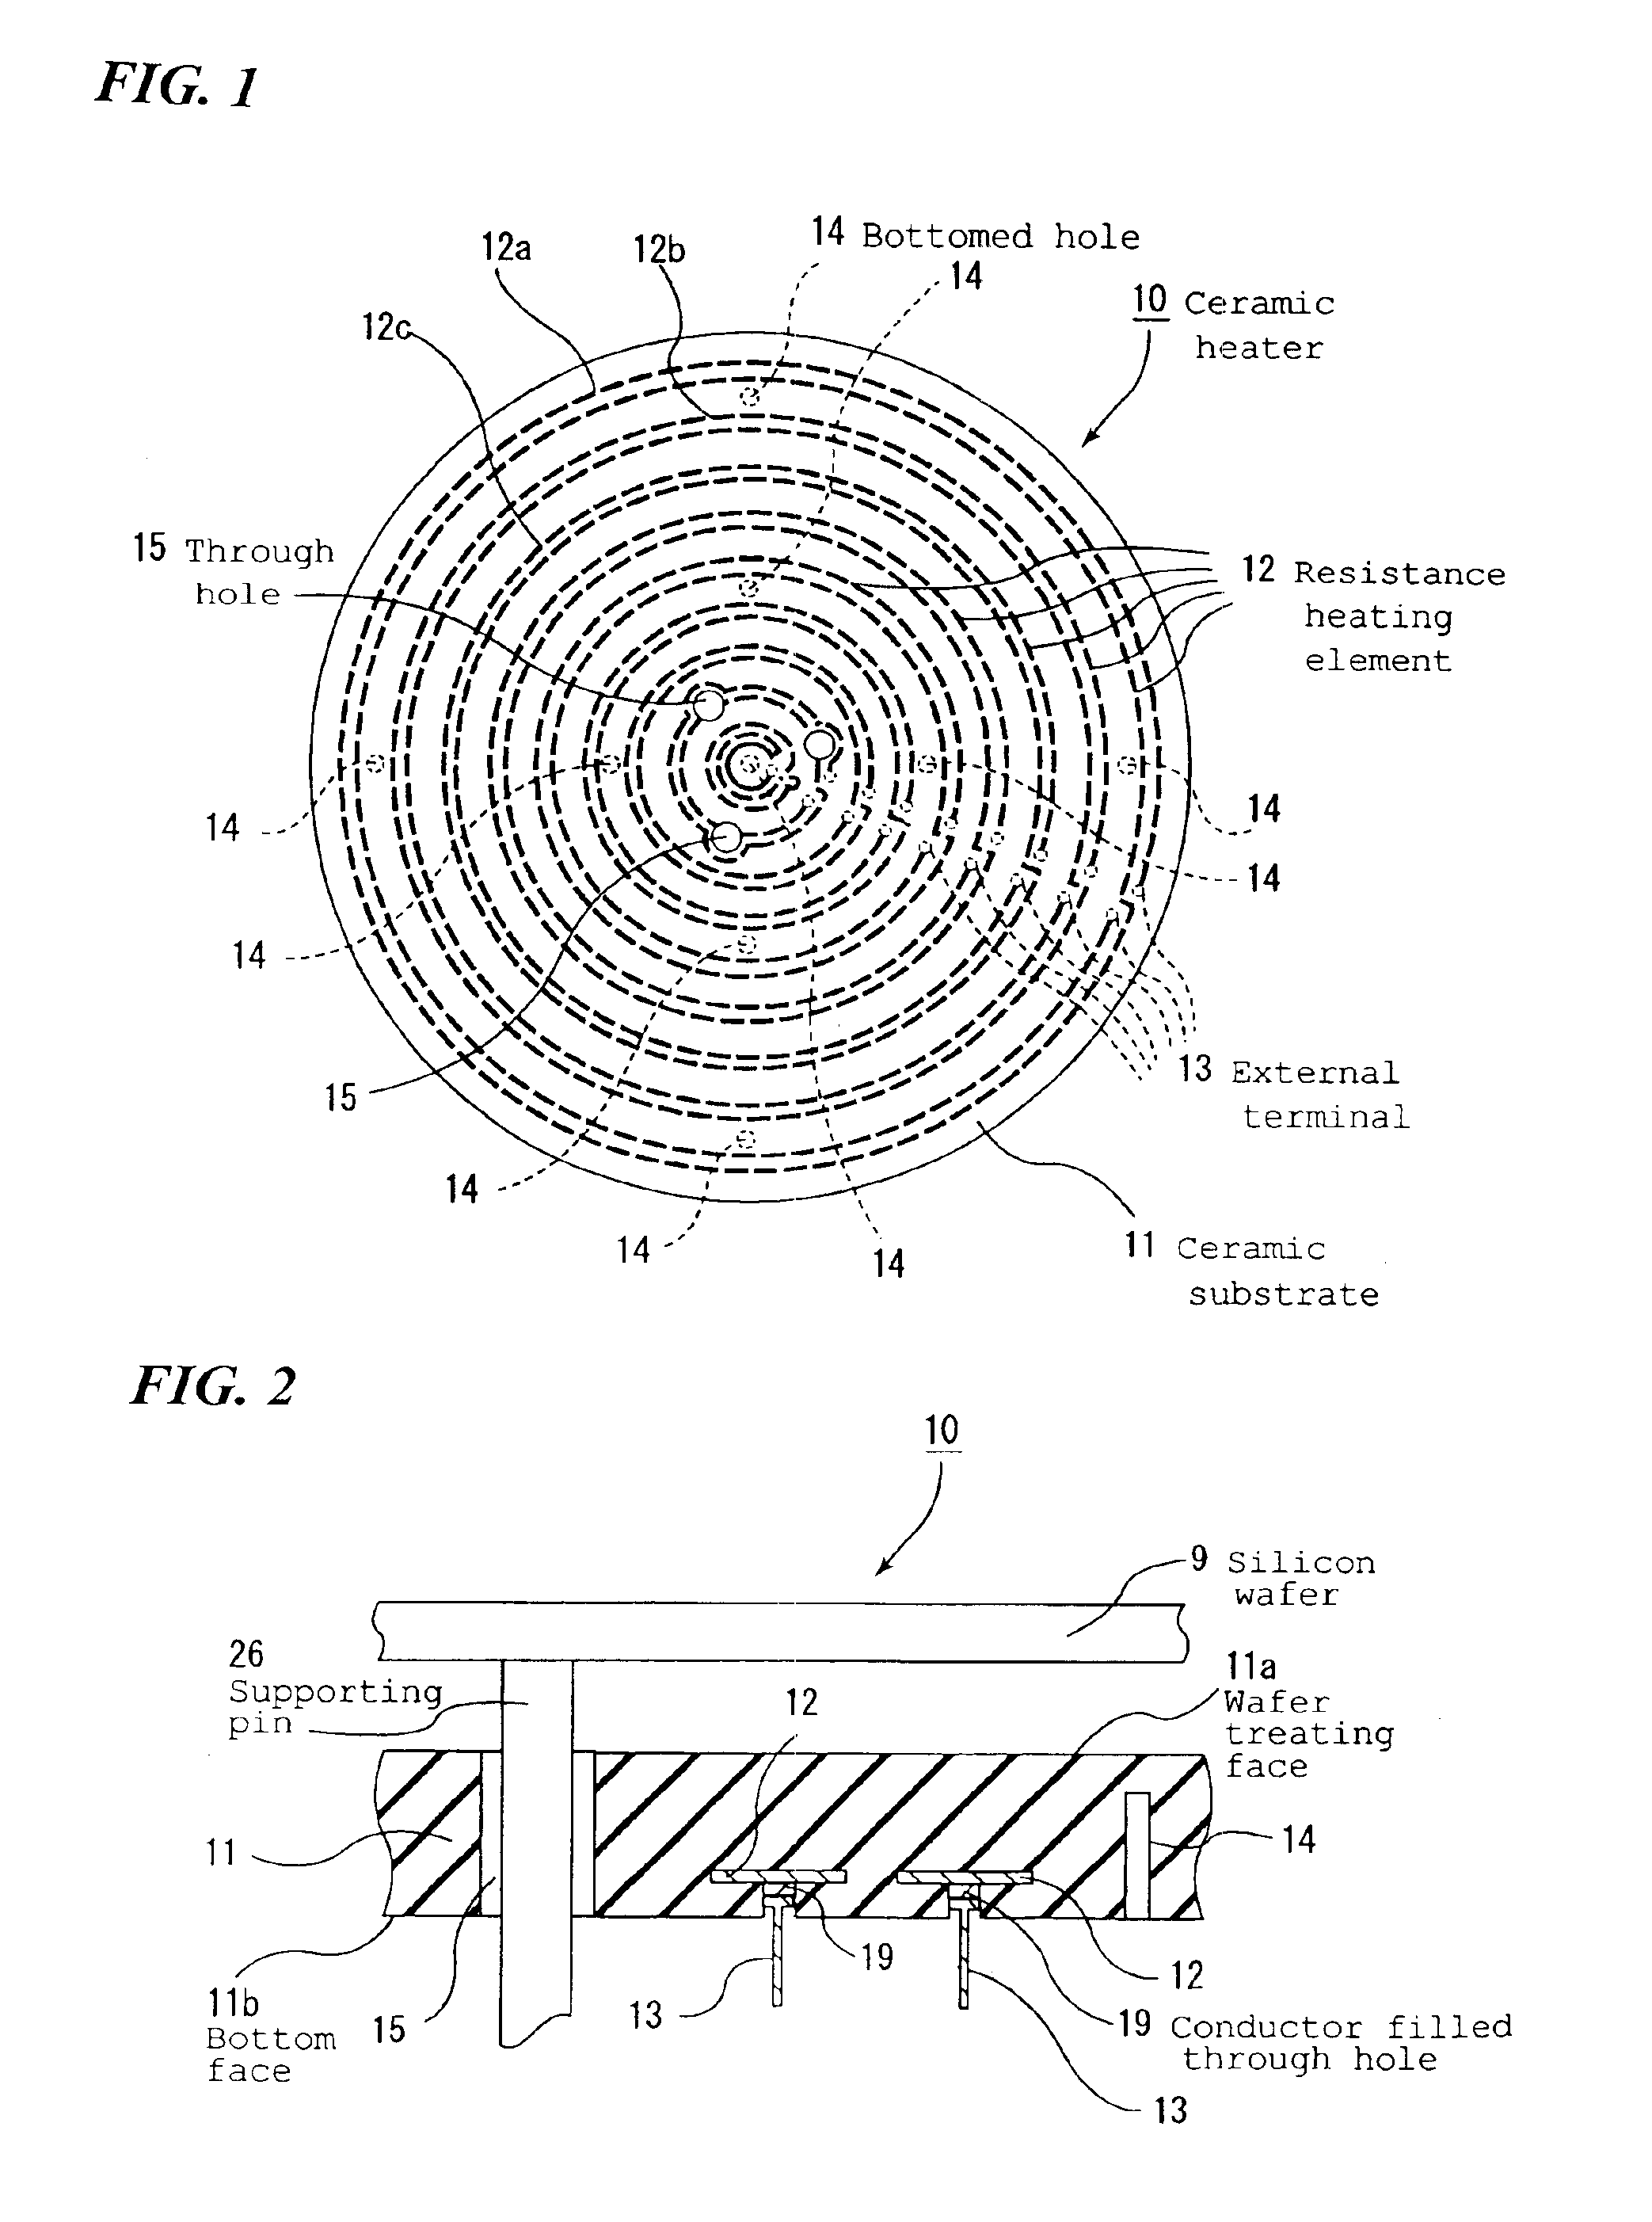 Ceramic substrate for manufacture/inspection of semiconductor